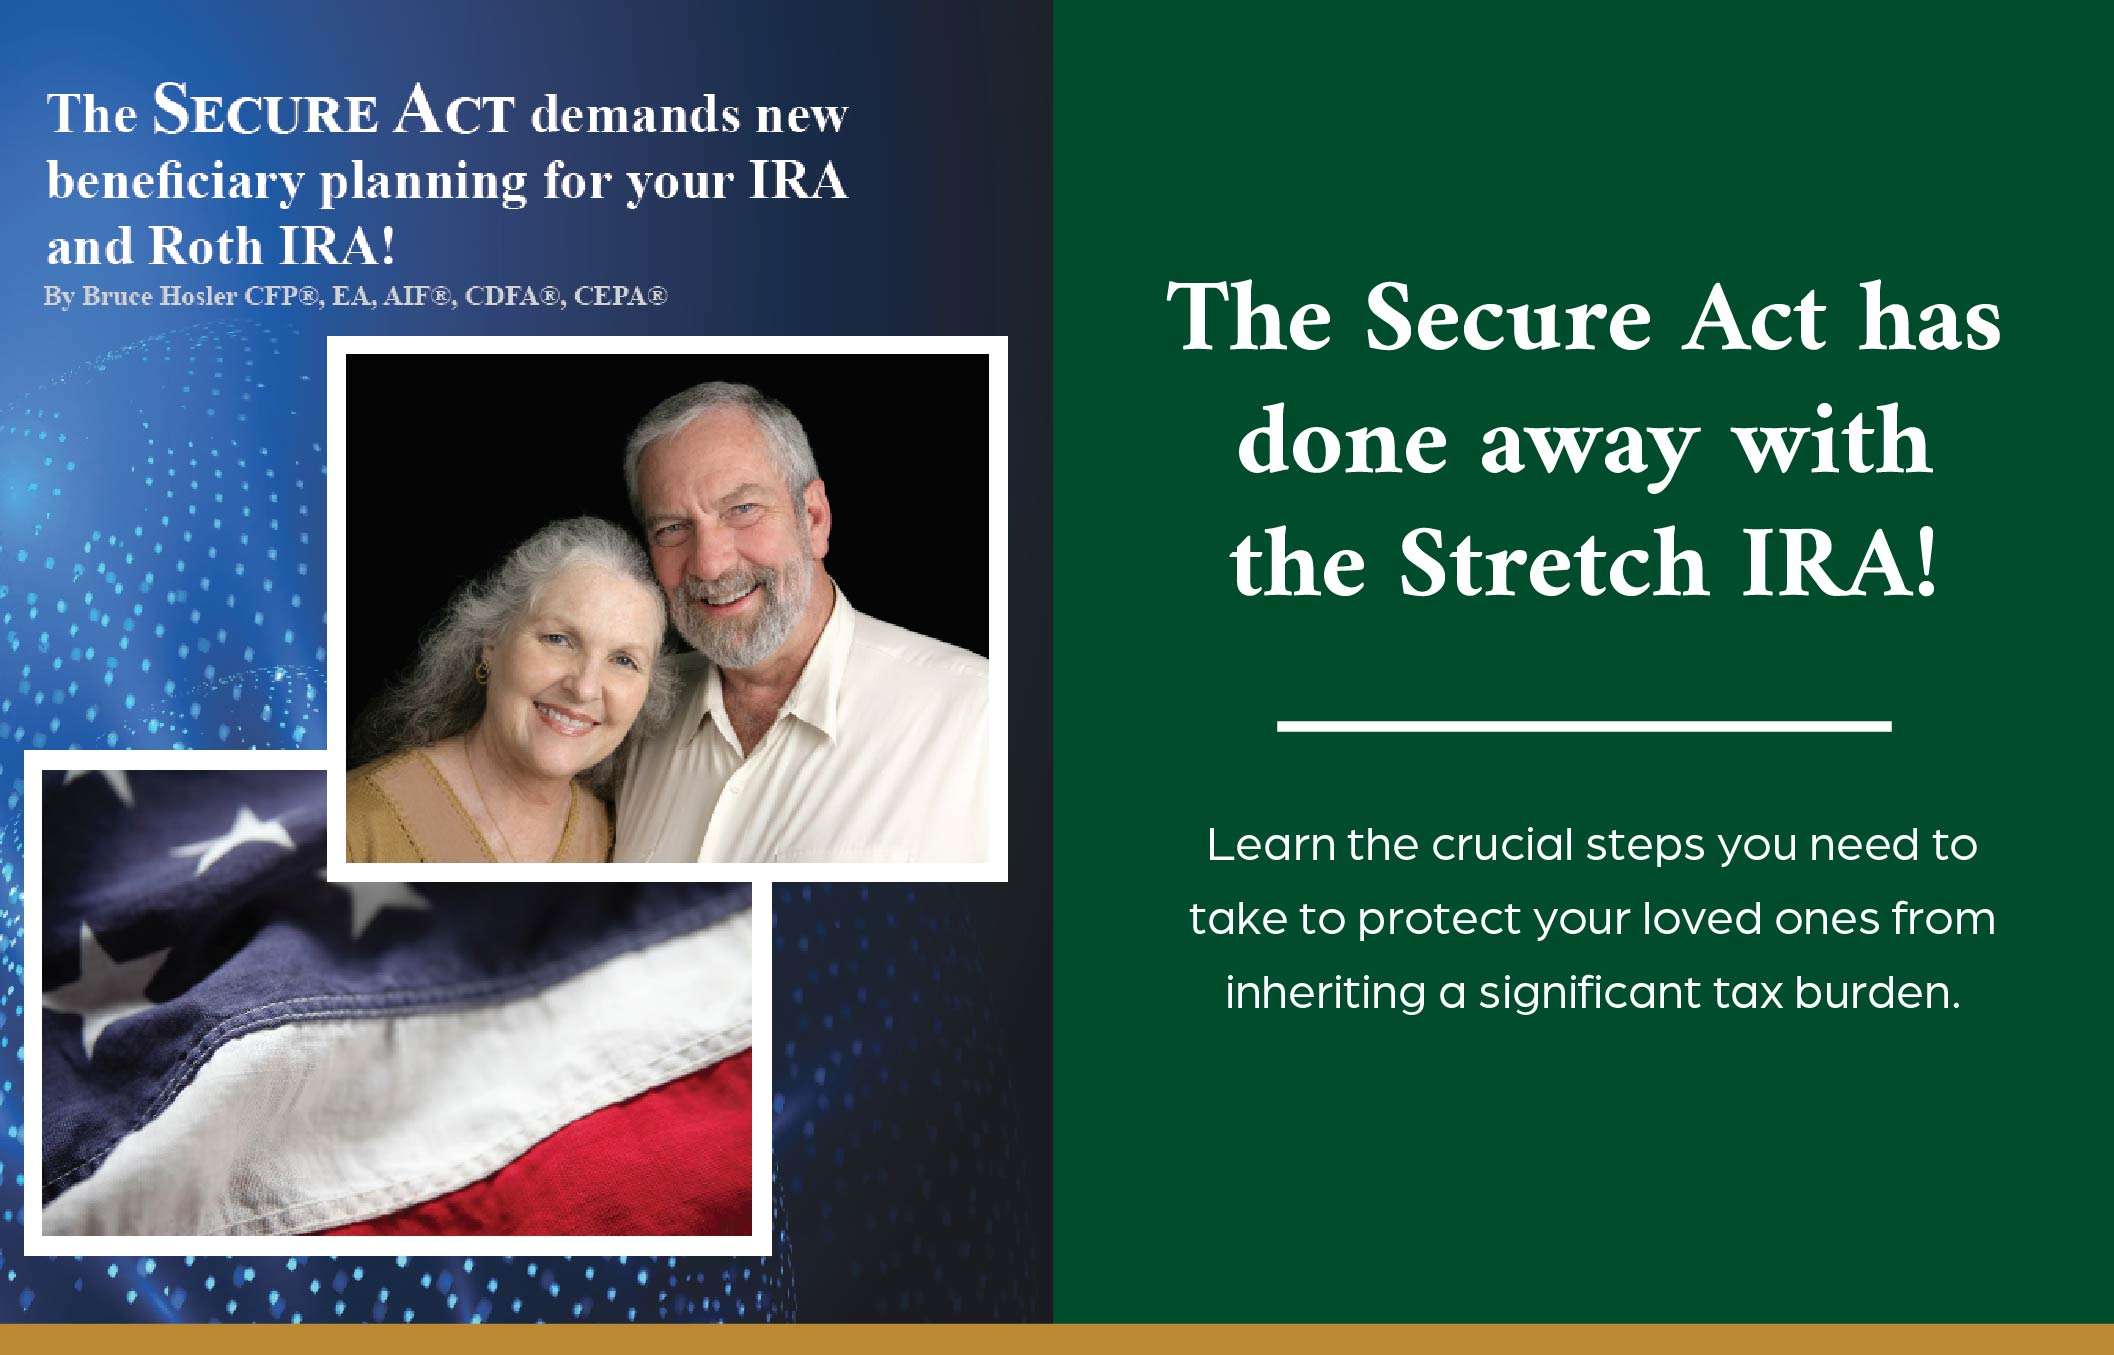 The secure act has done away with the stretch IRA! Learn the crucial steps you need to take to protect your loved ones from inheriting a significant tax burden